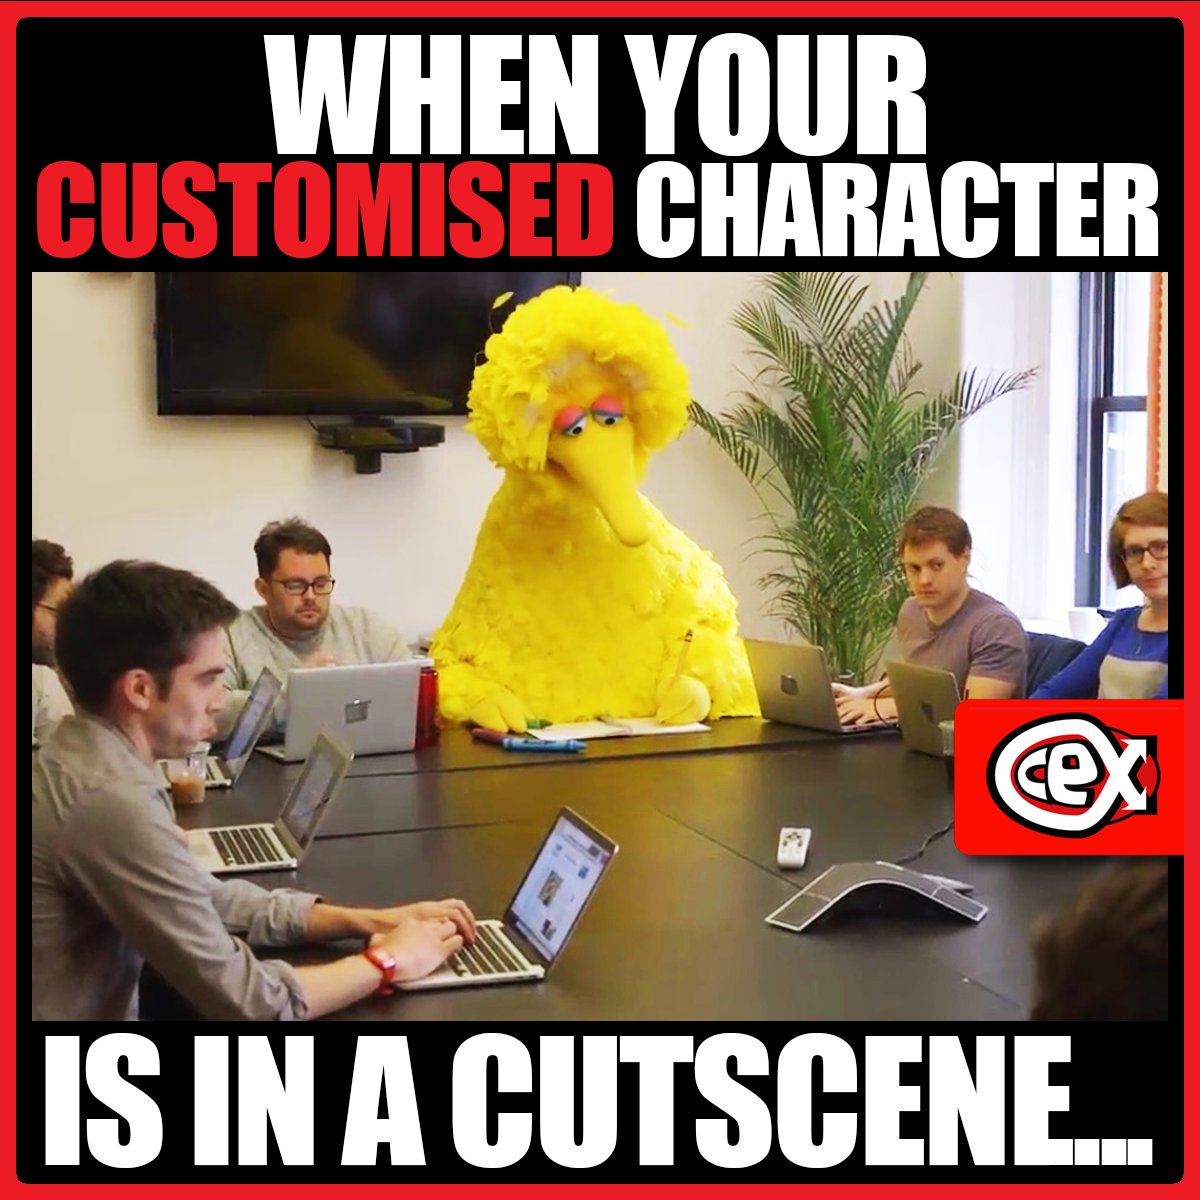 Cex On Twitter There S Nothing Better Than A Super Serious Cut